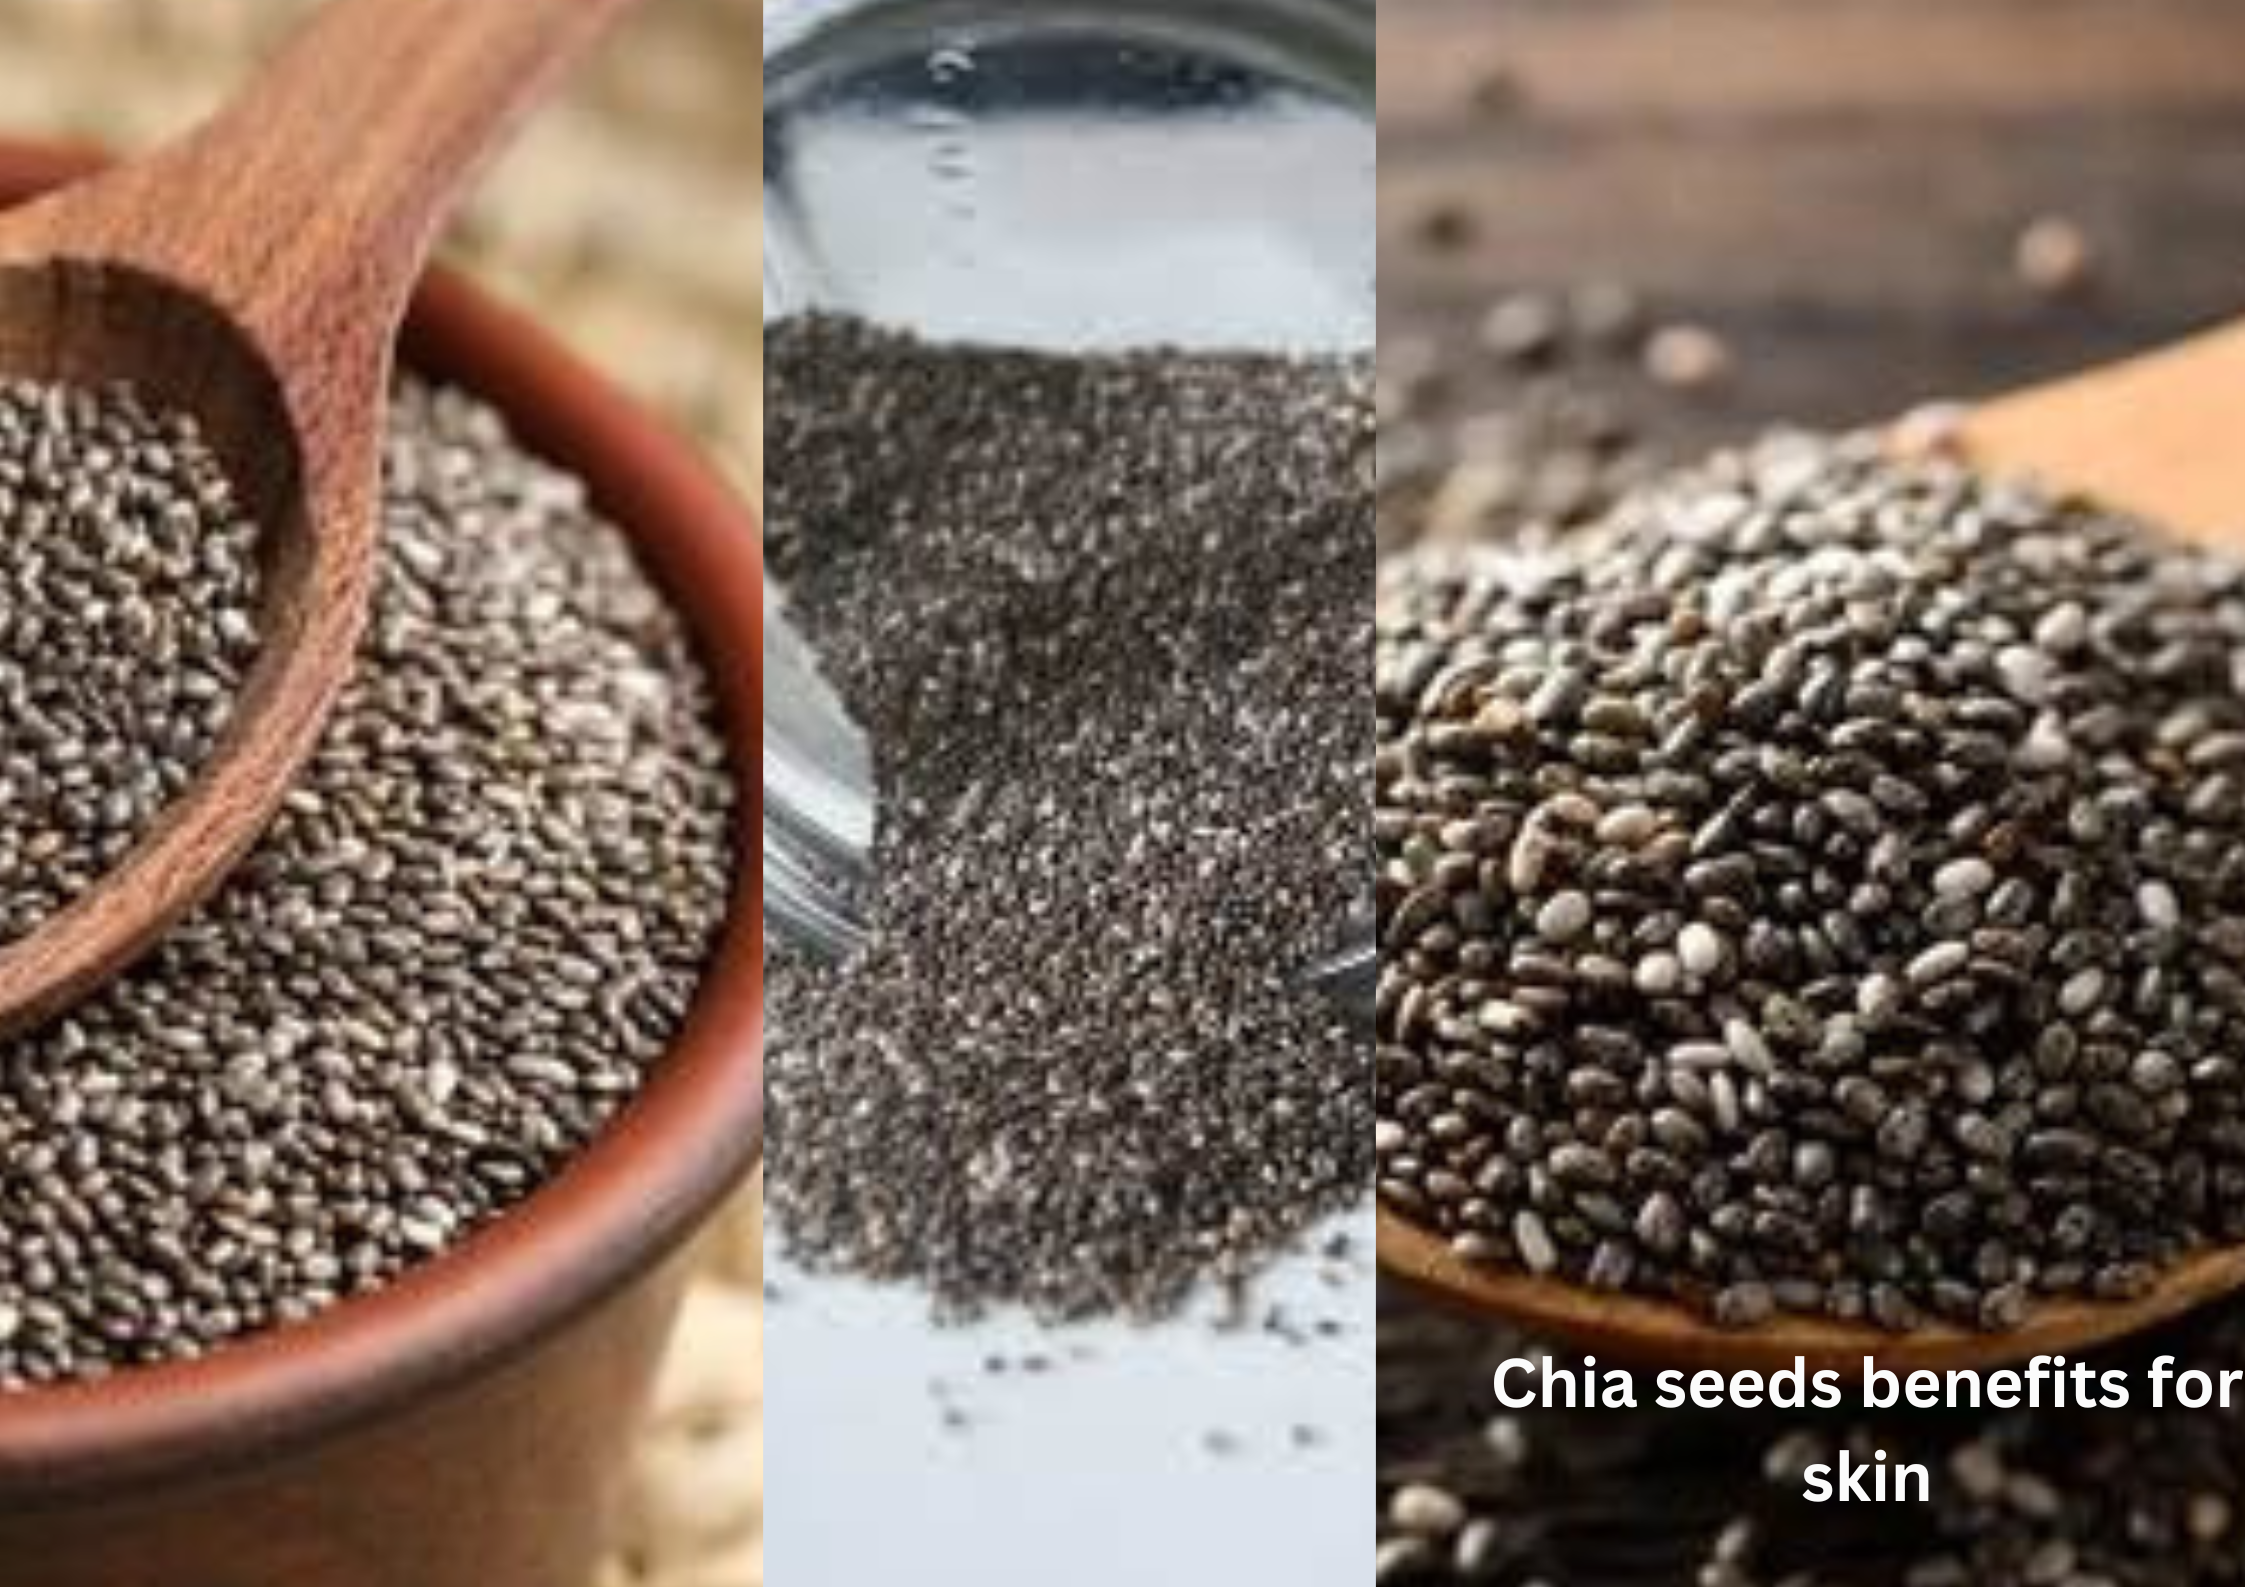 Chia seeds benefits for skin